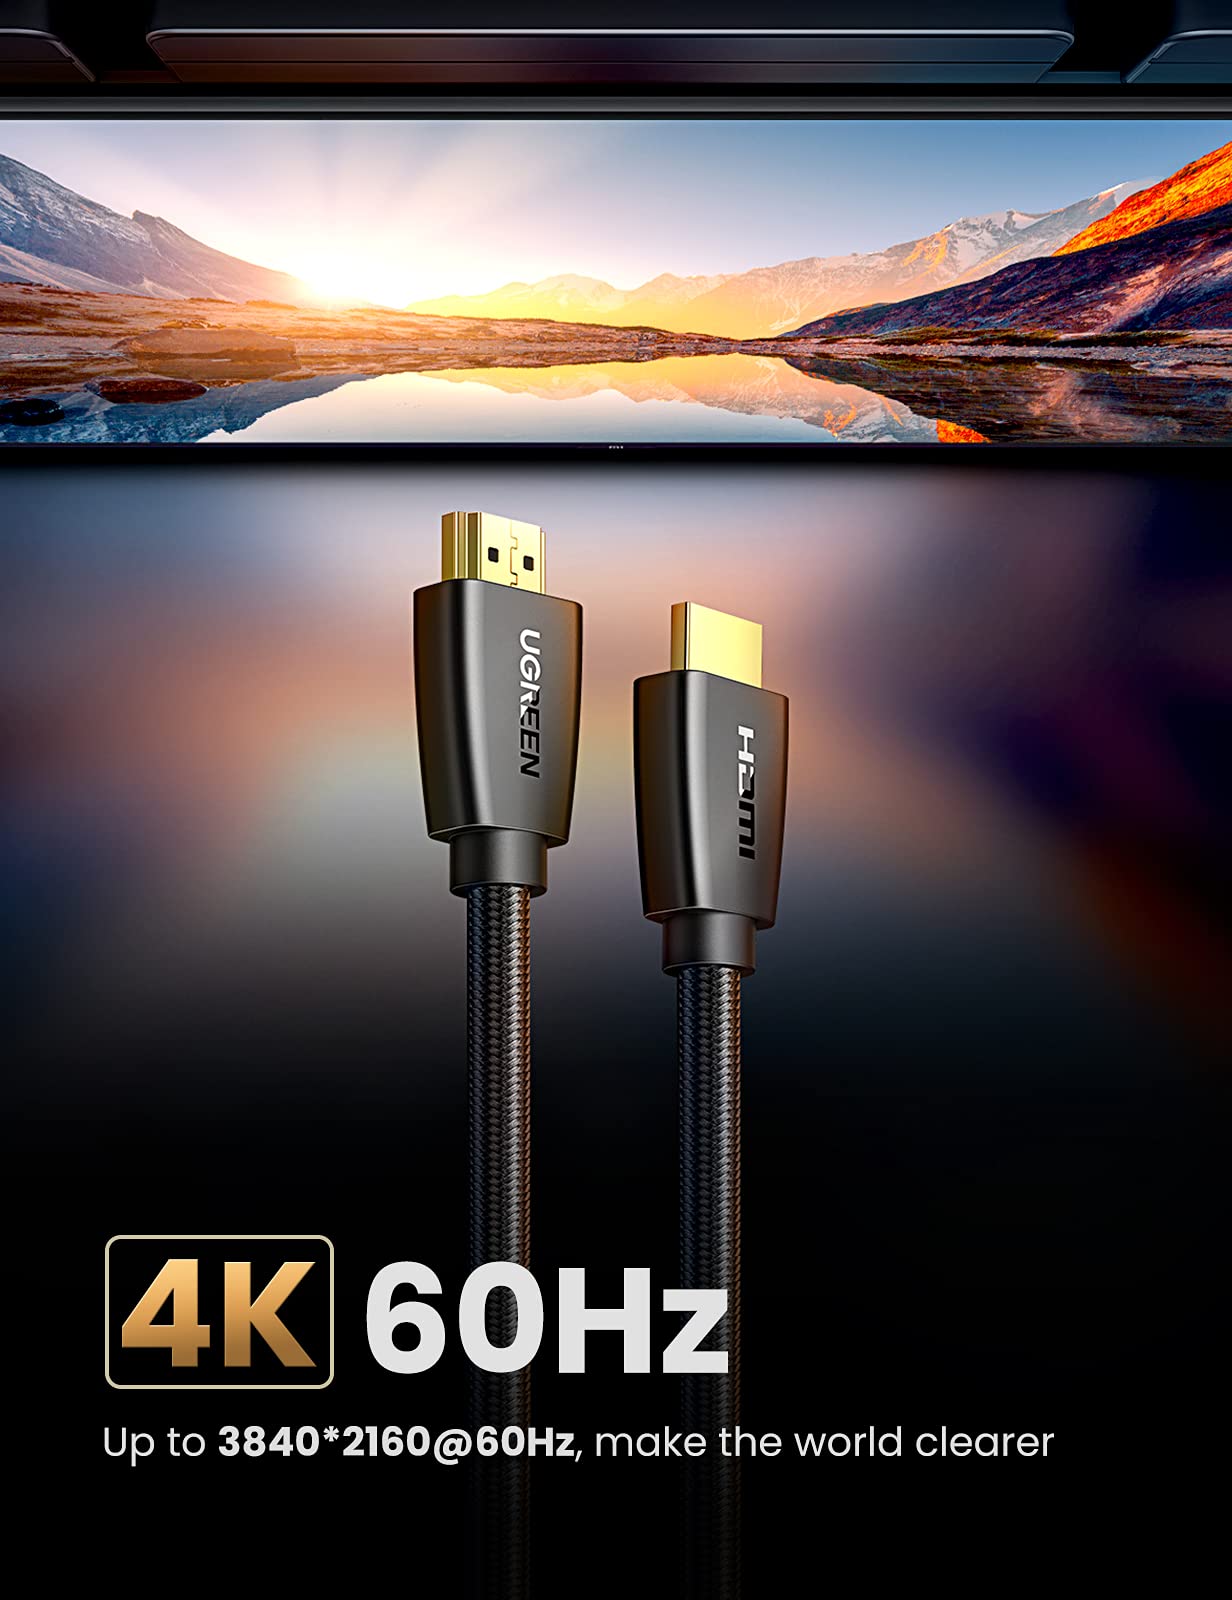 Ugreen HDMI Cable 4K 3M HDMI 2.0 18Gbps High-Speed 4K@60Hz HDMI To HDMI  Video Wire @ Best Price Online